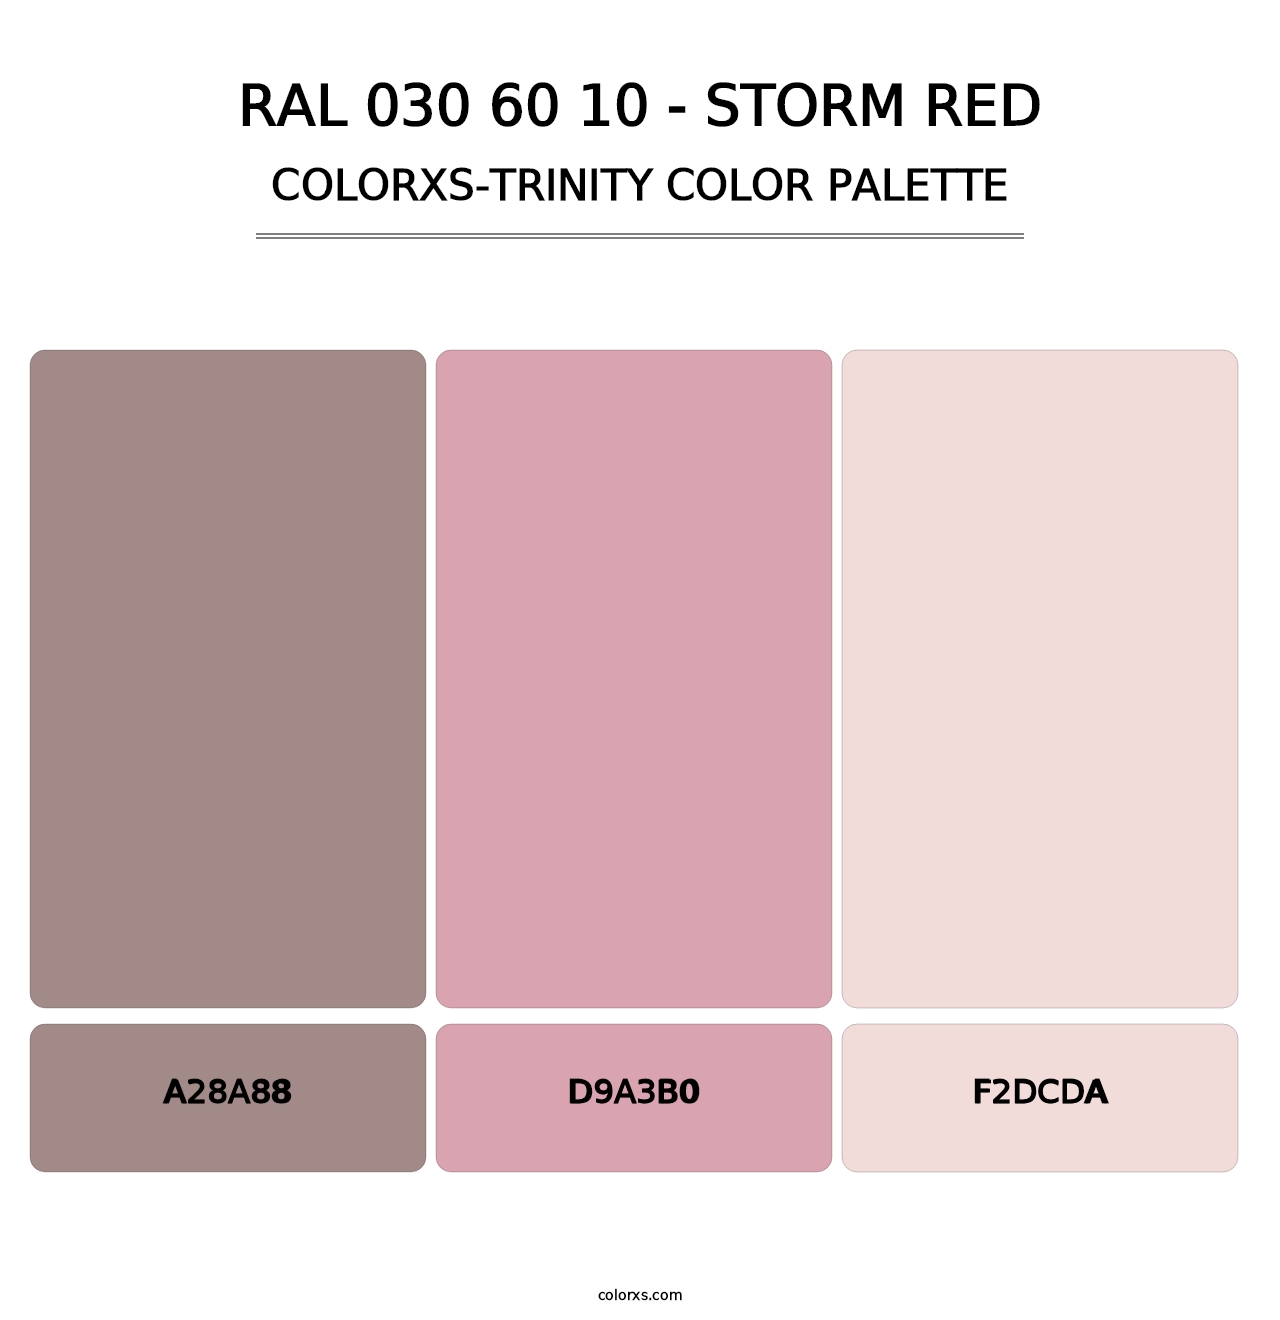 RAL 030 60 10 - Storm Red - Colorxs Trinity Palette